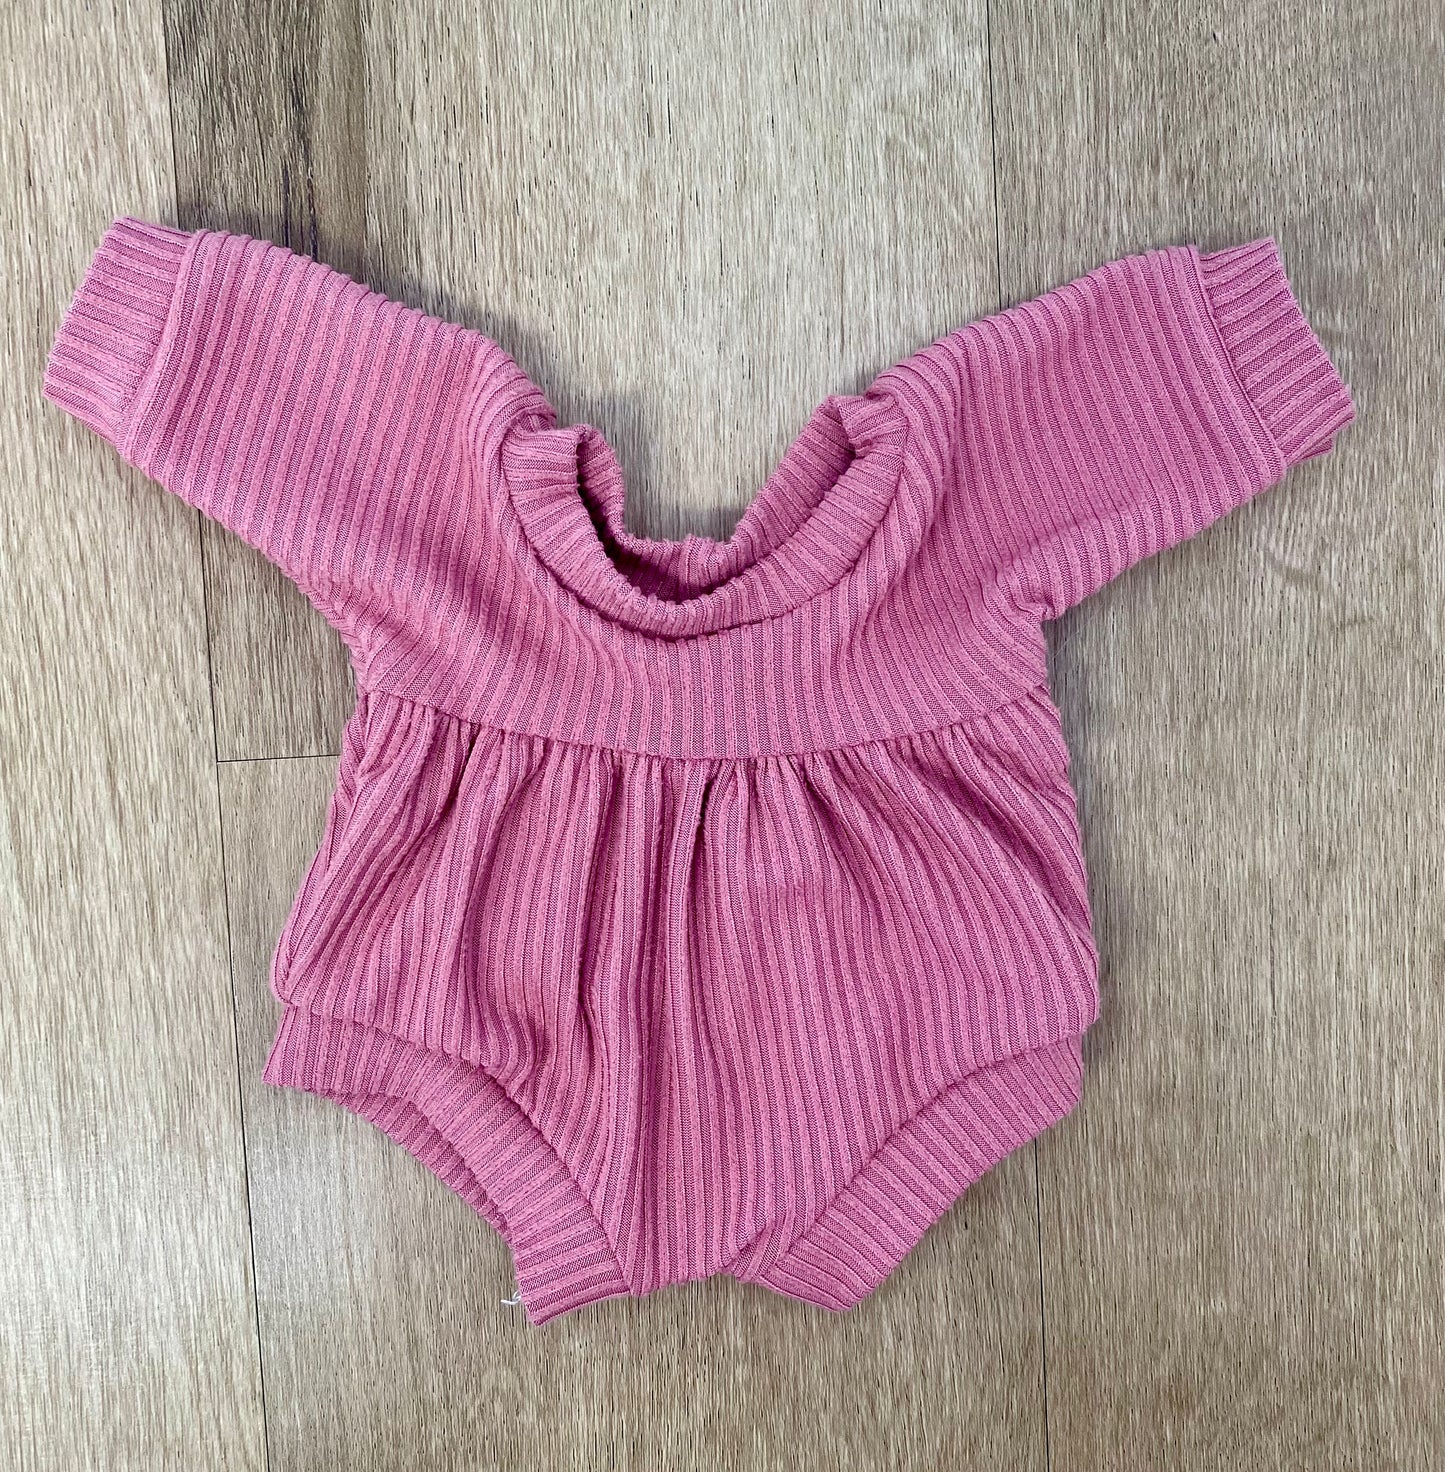 13” Doll Clothes